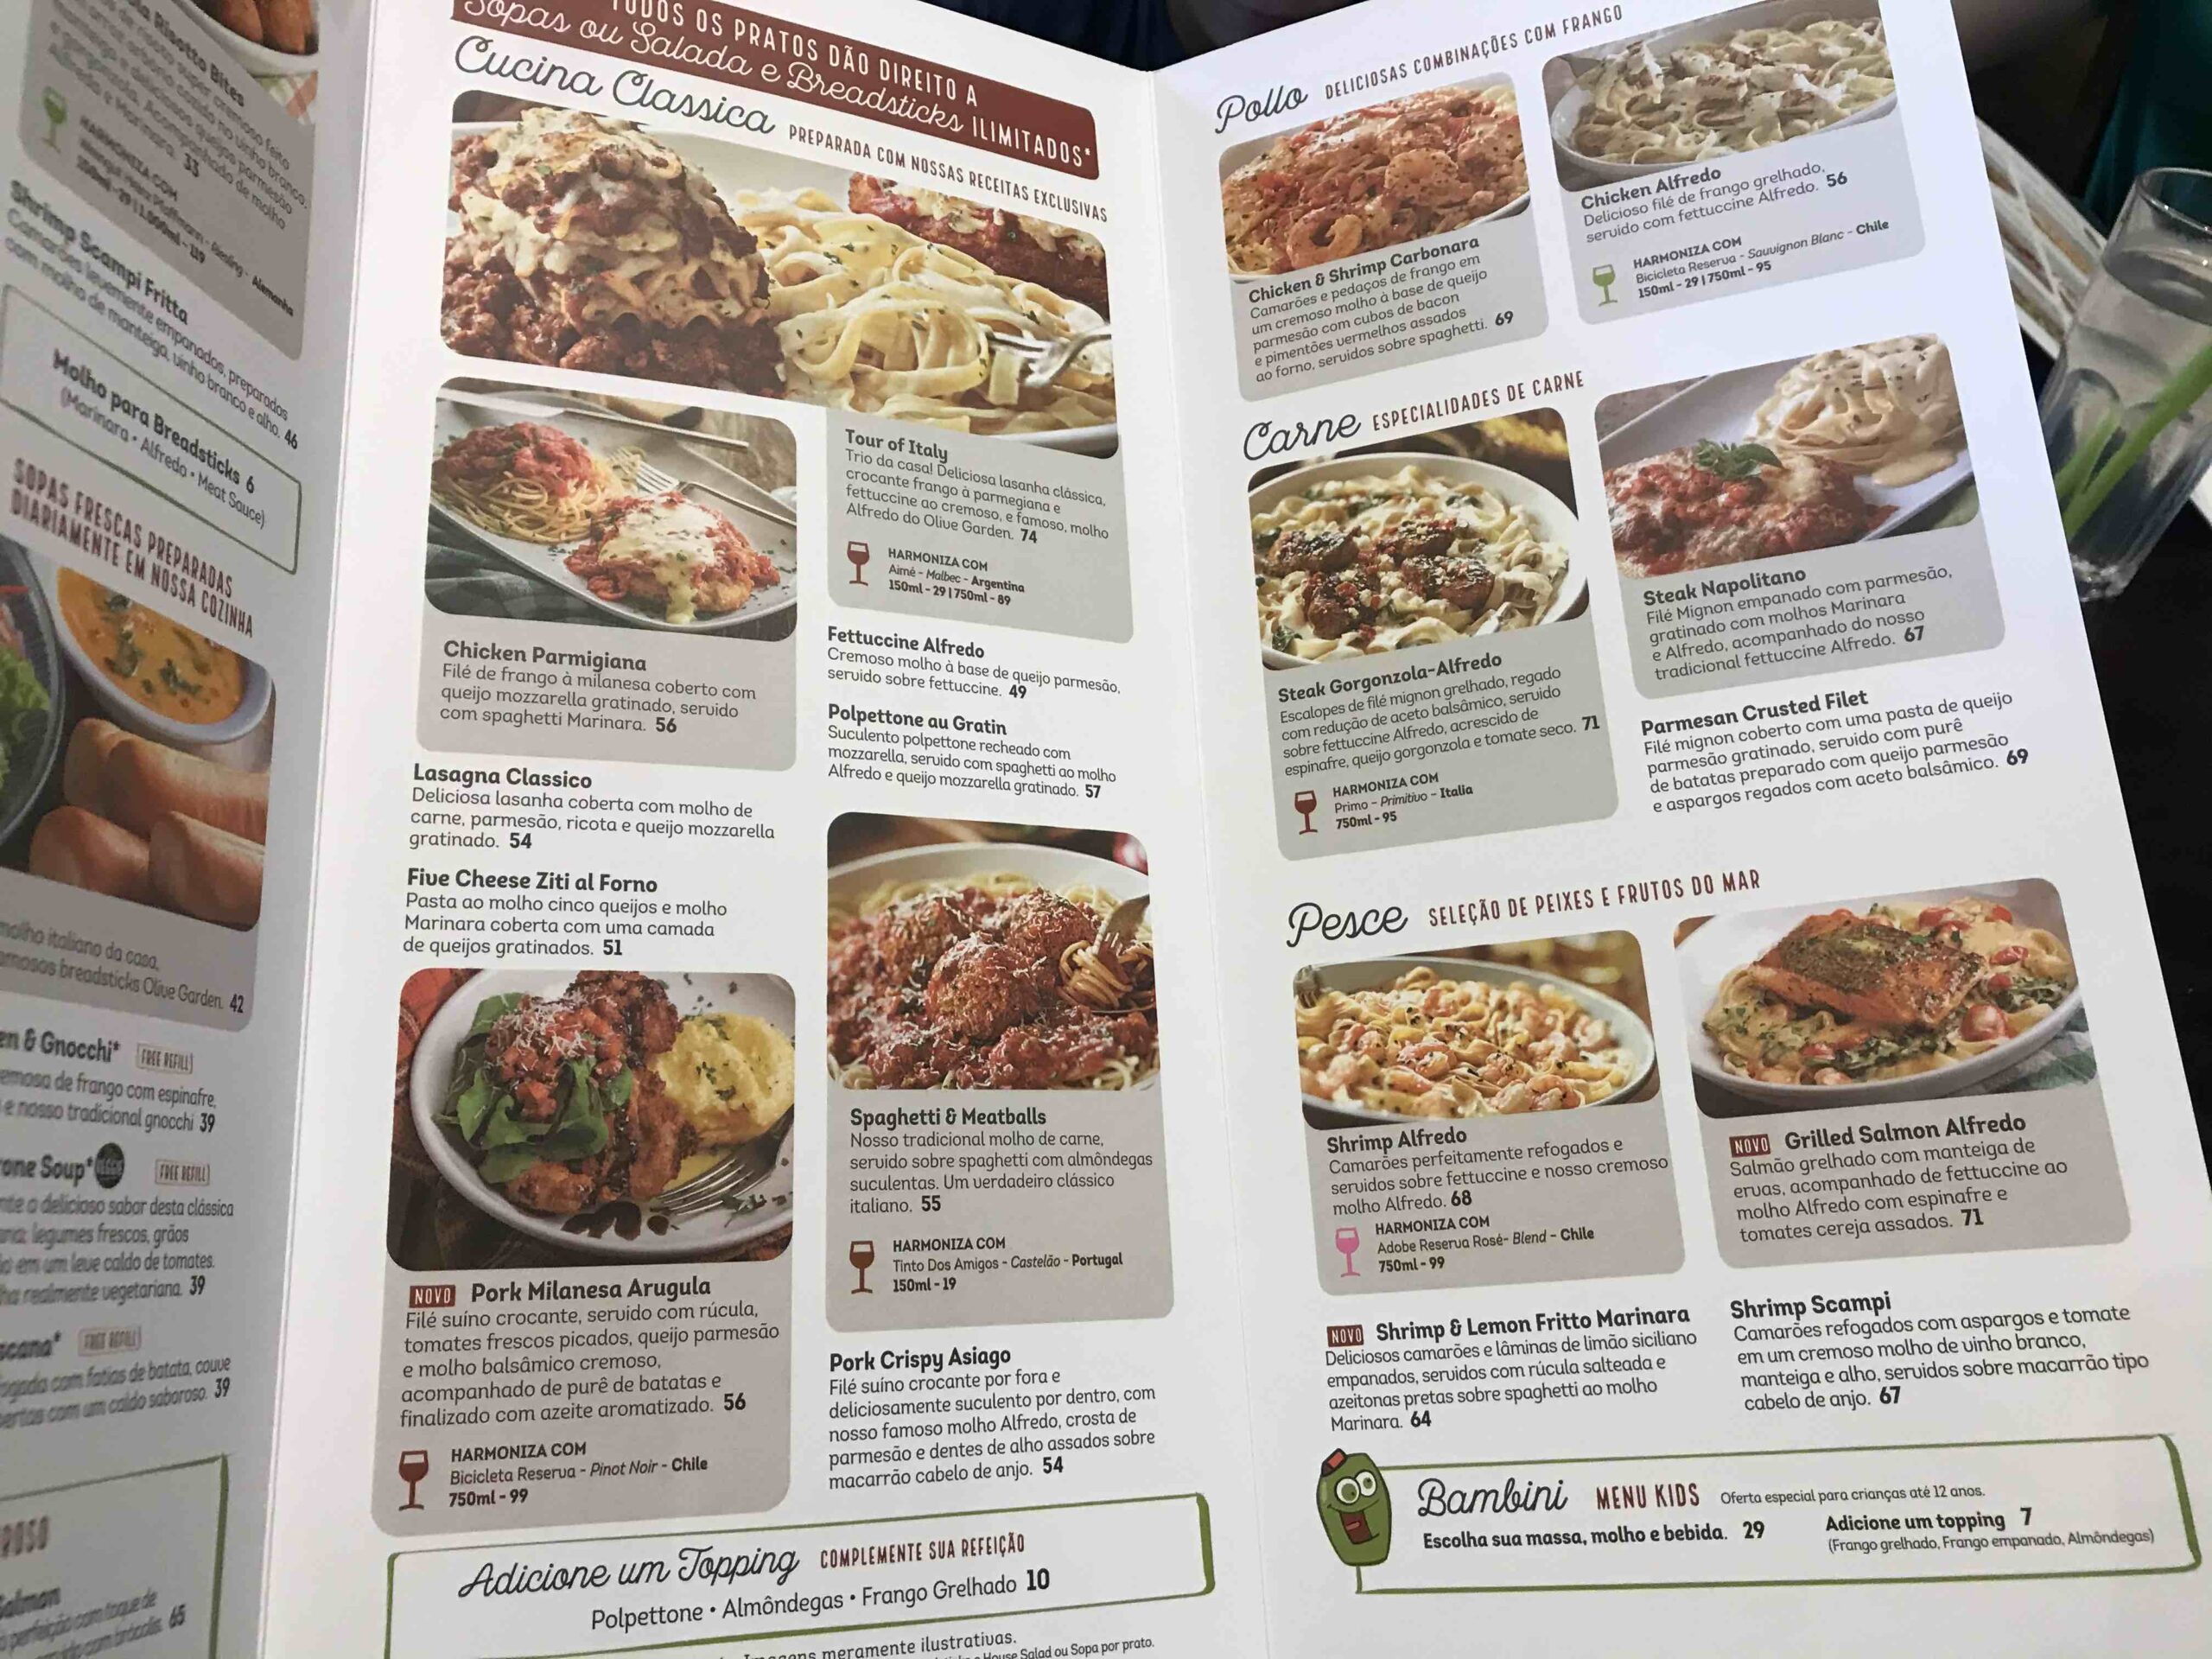 Dinner Olive Garden Menu With Pictures Outlet Offers, Save 59% |  jlcatj.gob.mx - olive garden cardapio